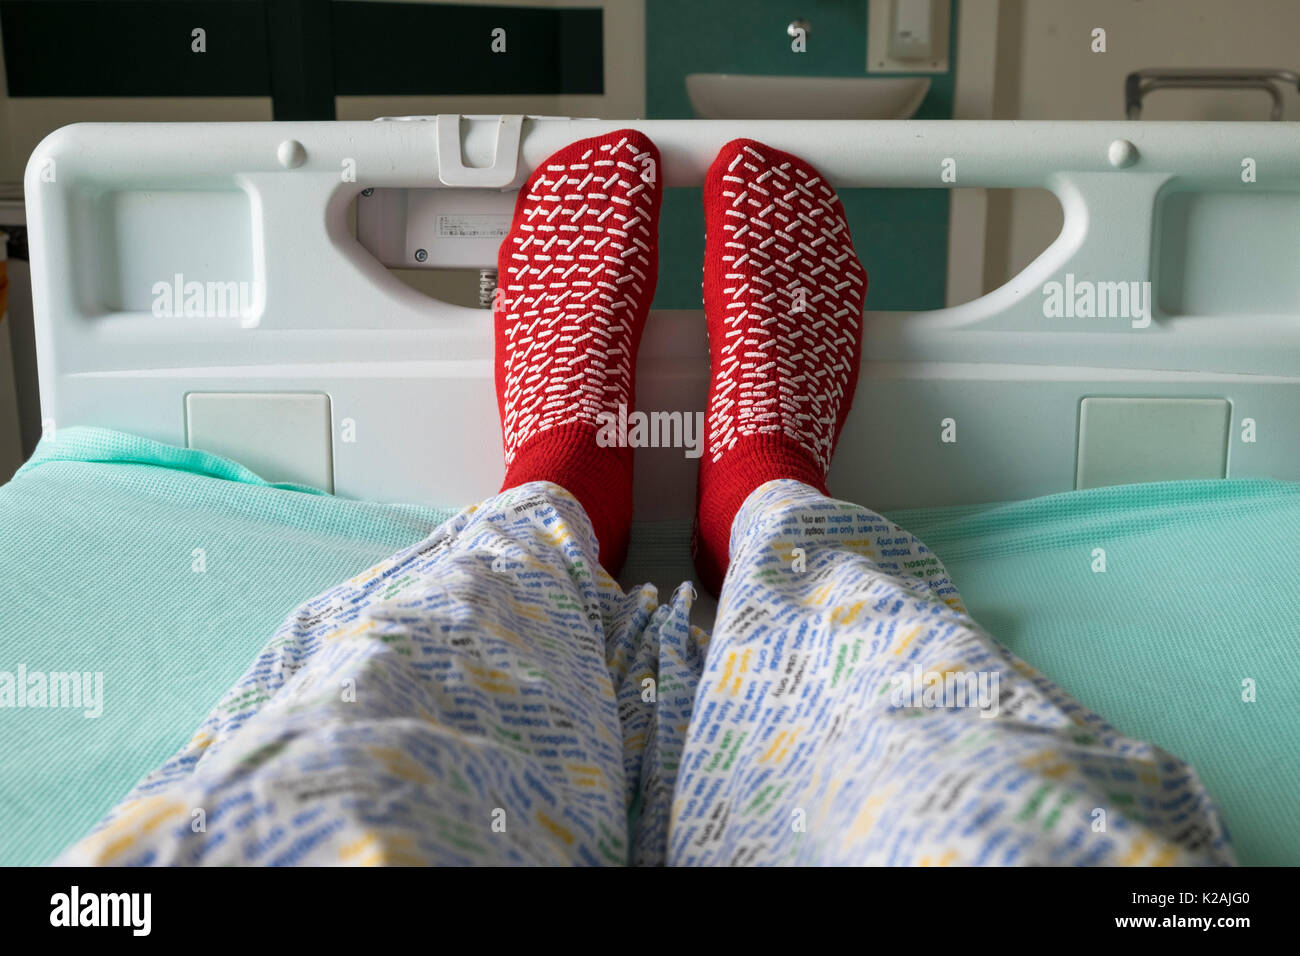 Patient lying in a hospital bed with hospital use only pyjama bottoms and non slip socks, isolation ward, uk Stock Photo